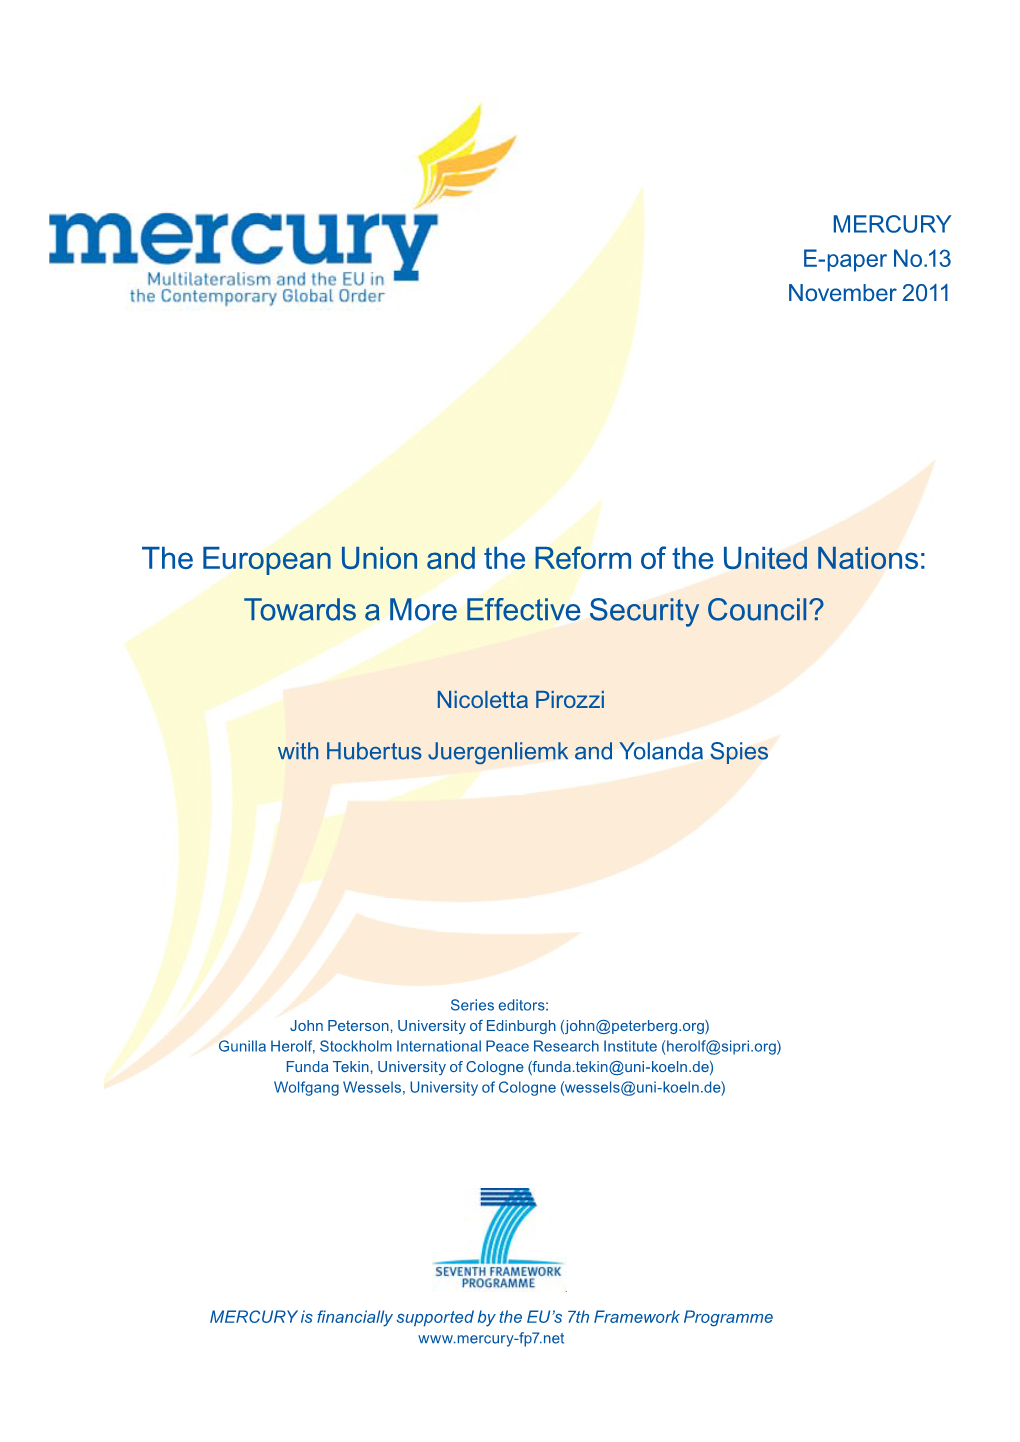 The European Union and the Reform of the United Nations: Towards a More Effective Security Council?